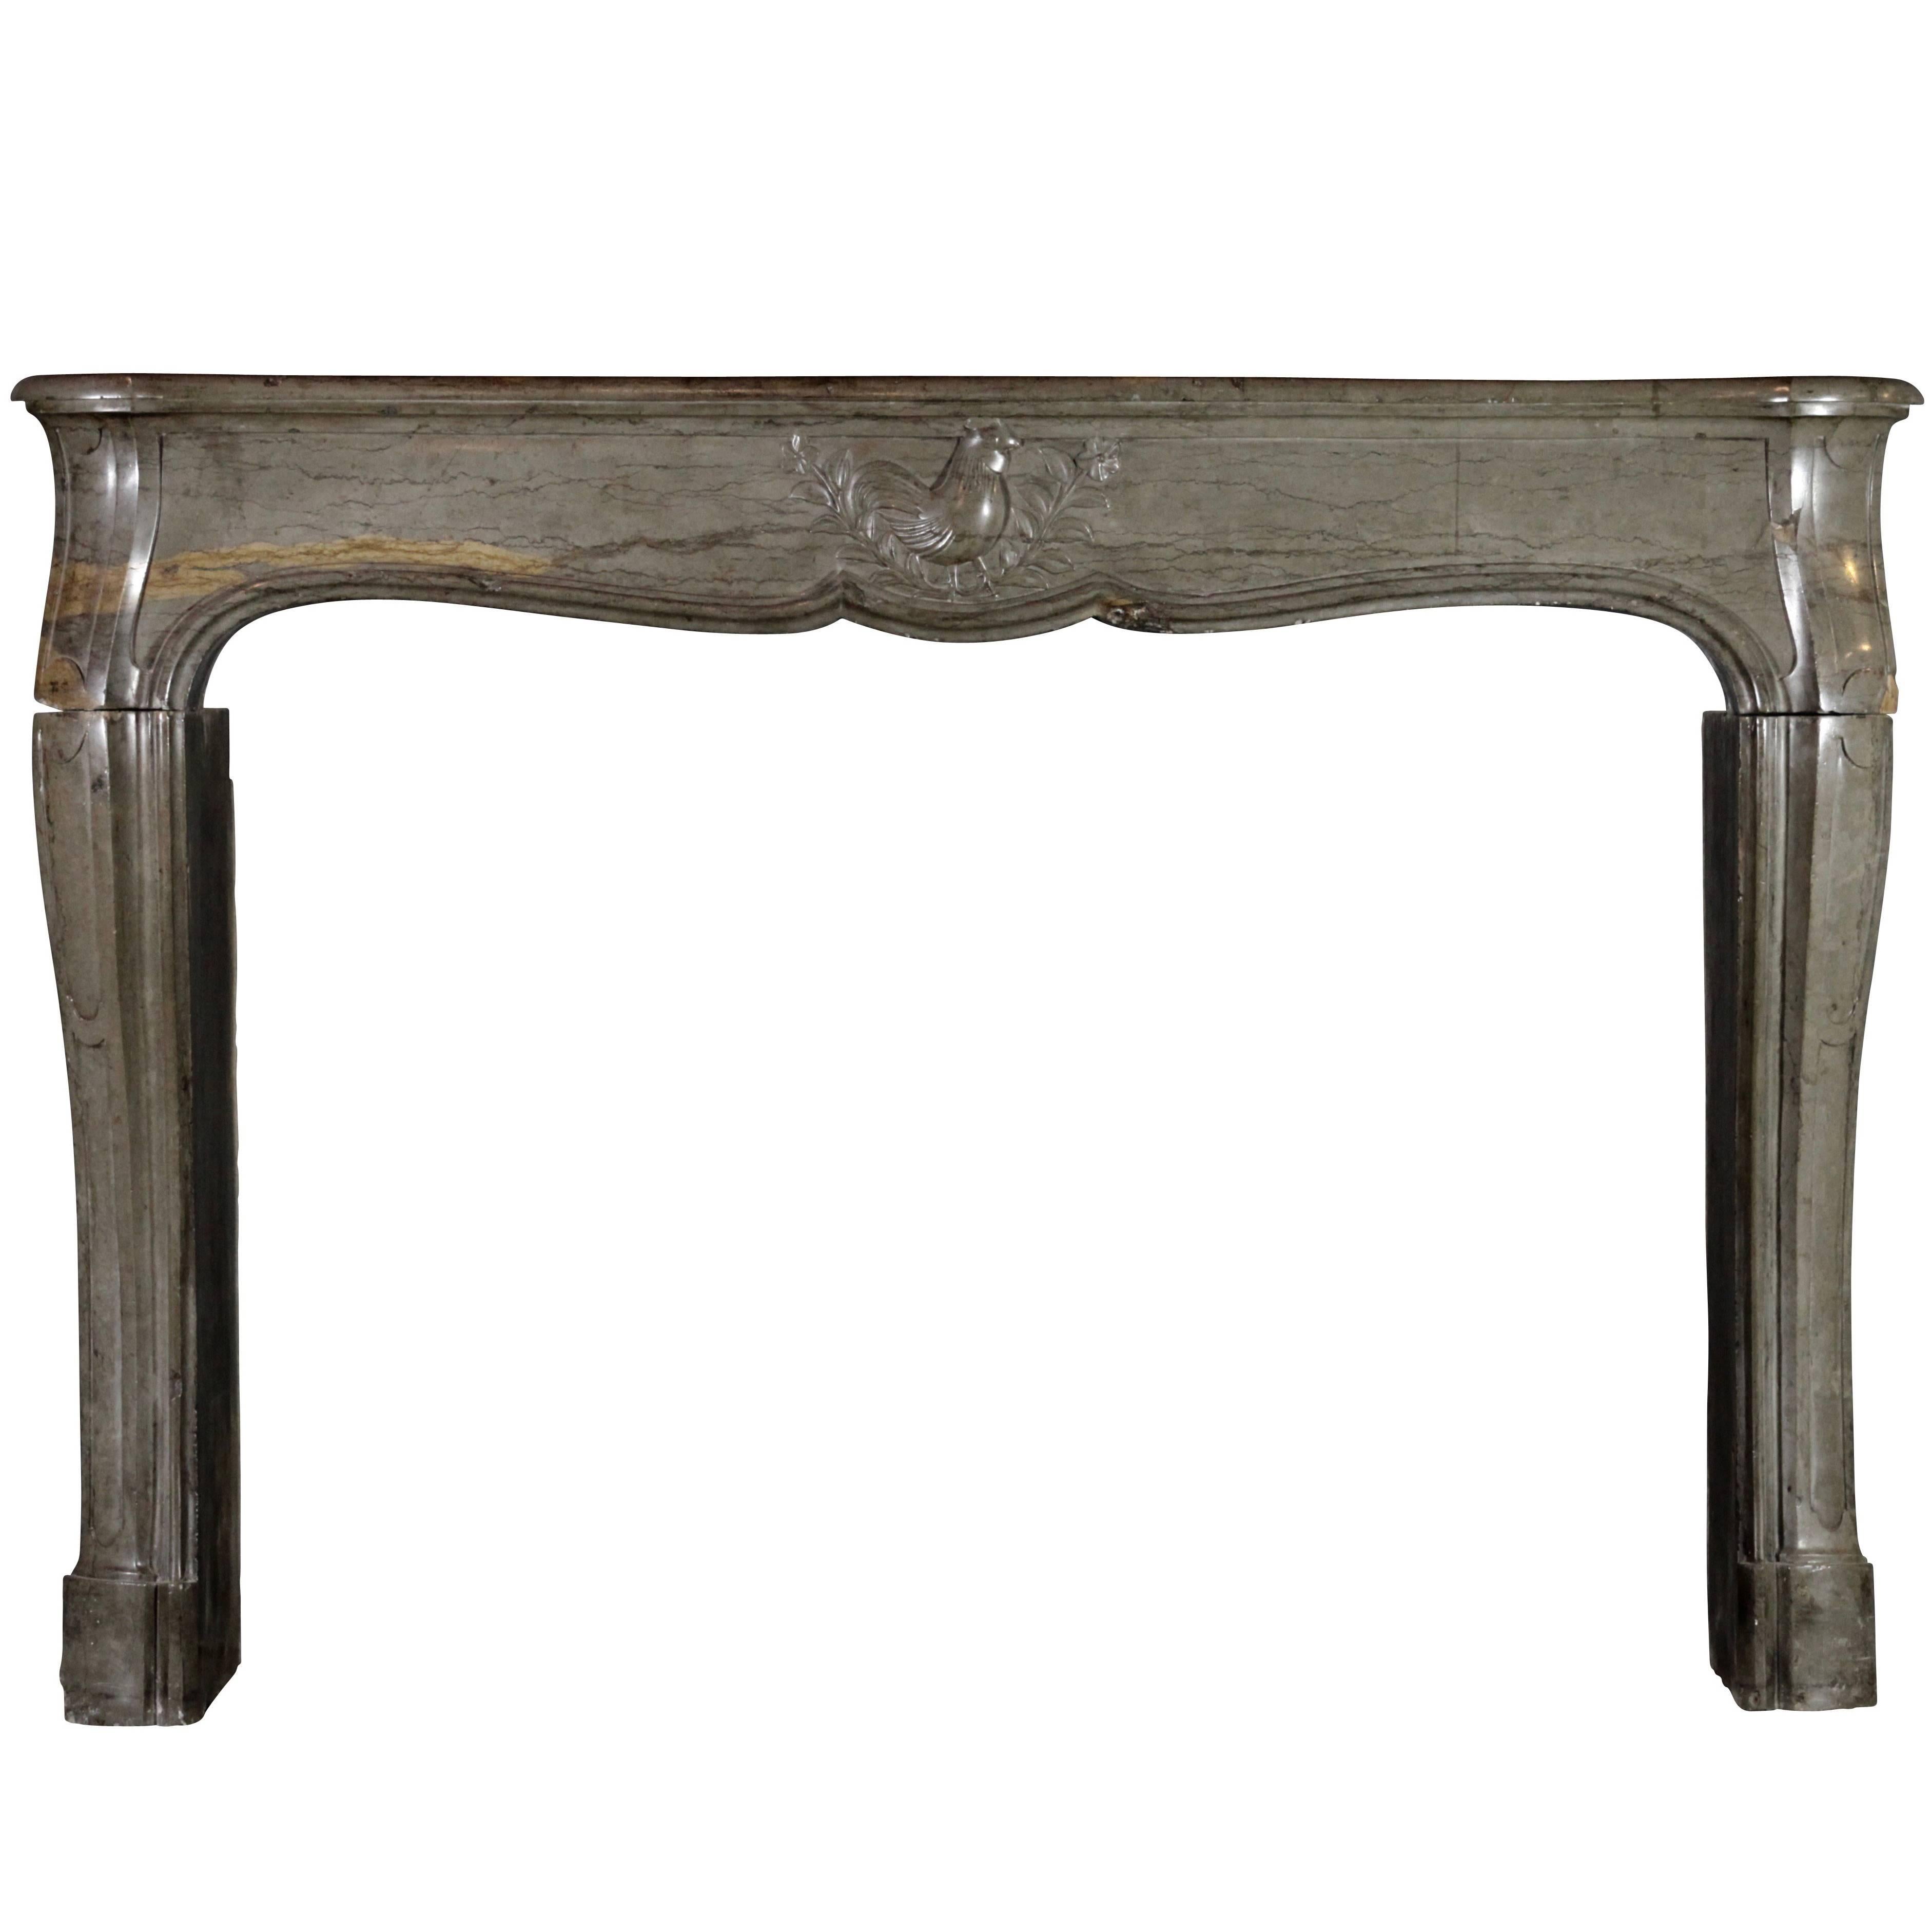 18th Century Original French Country Fireplace Mantle For Sale